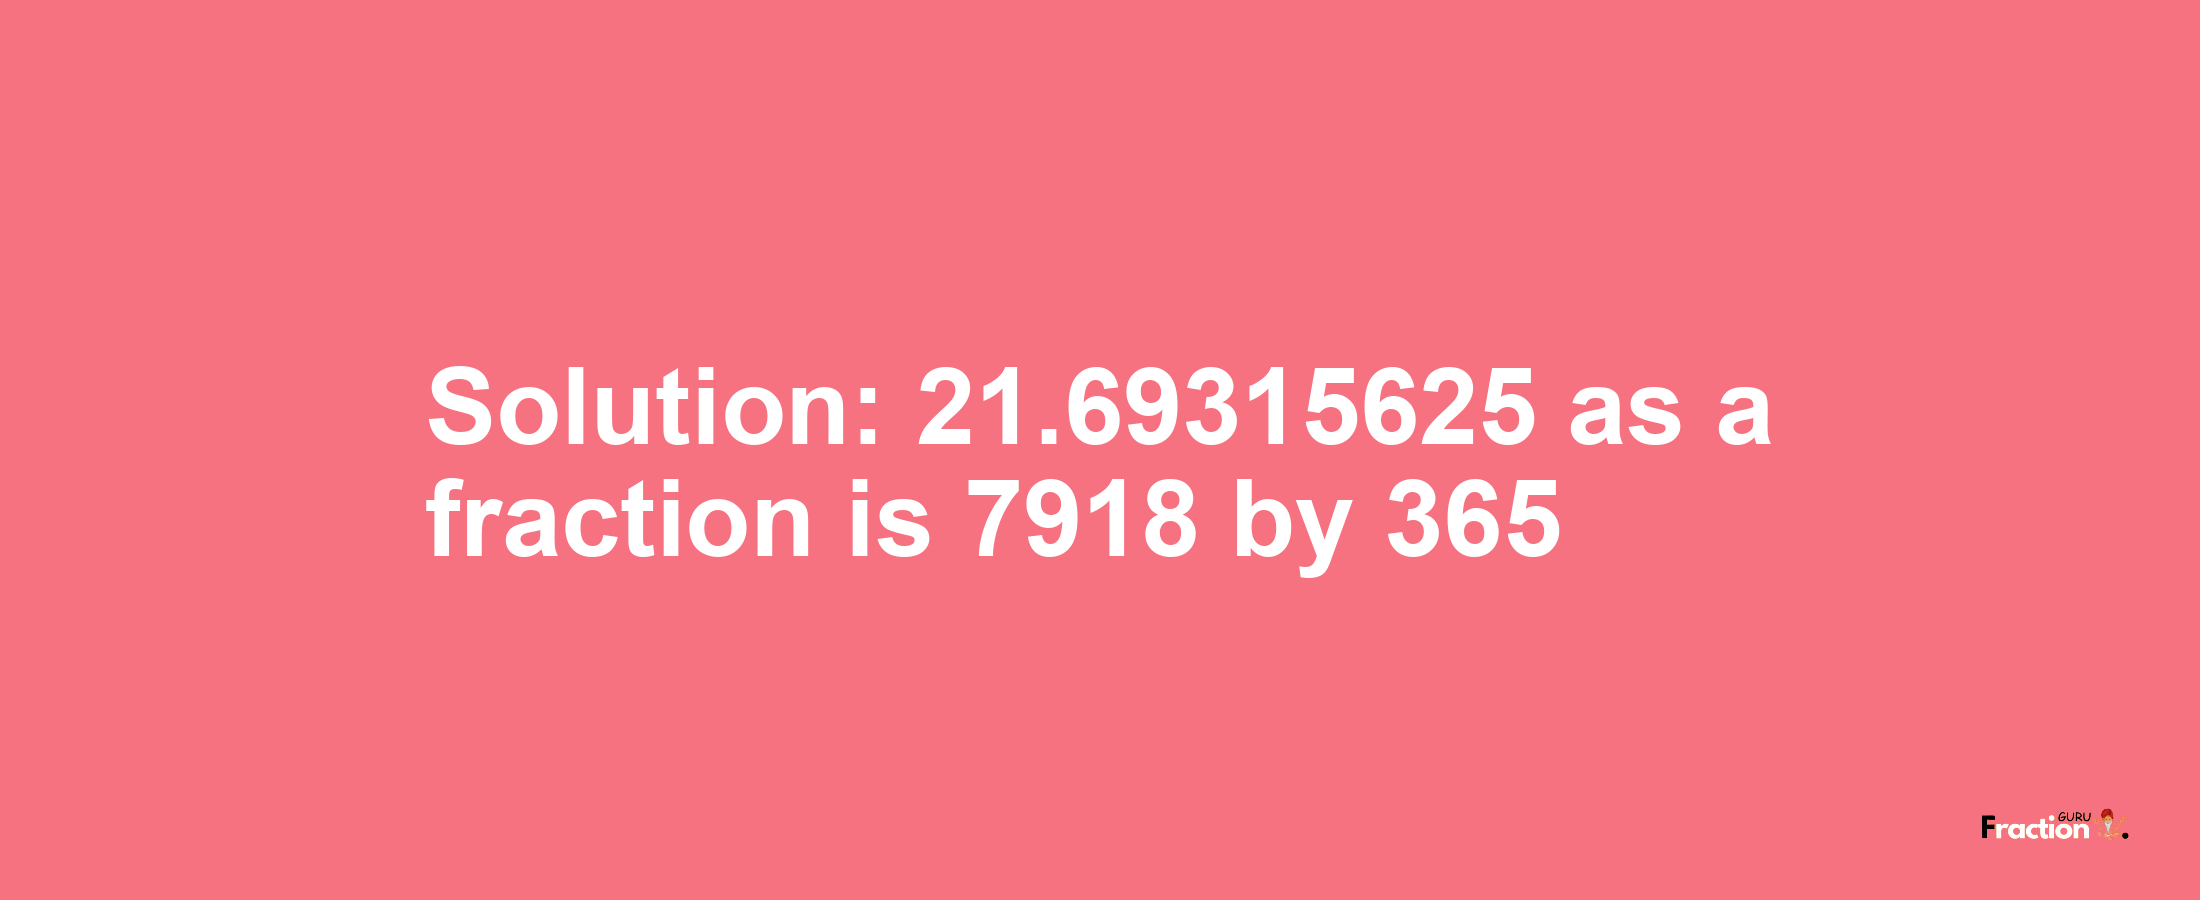 Solution:21.69315625 as a fraction is 7918/365